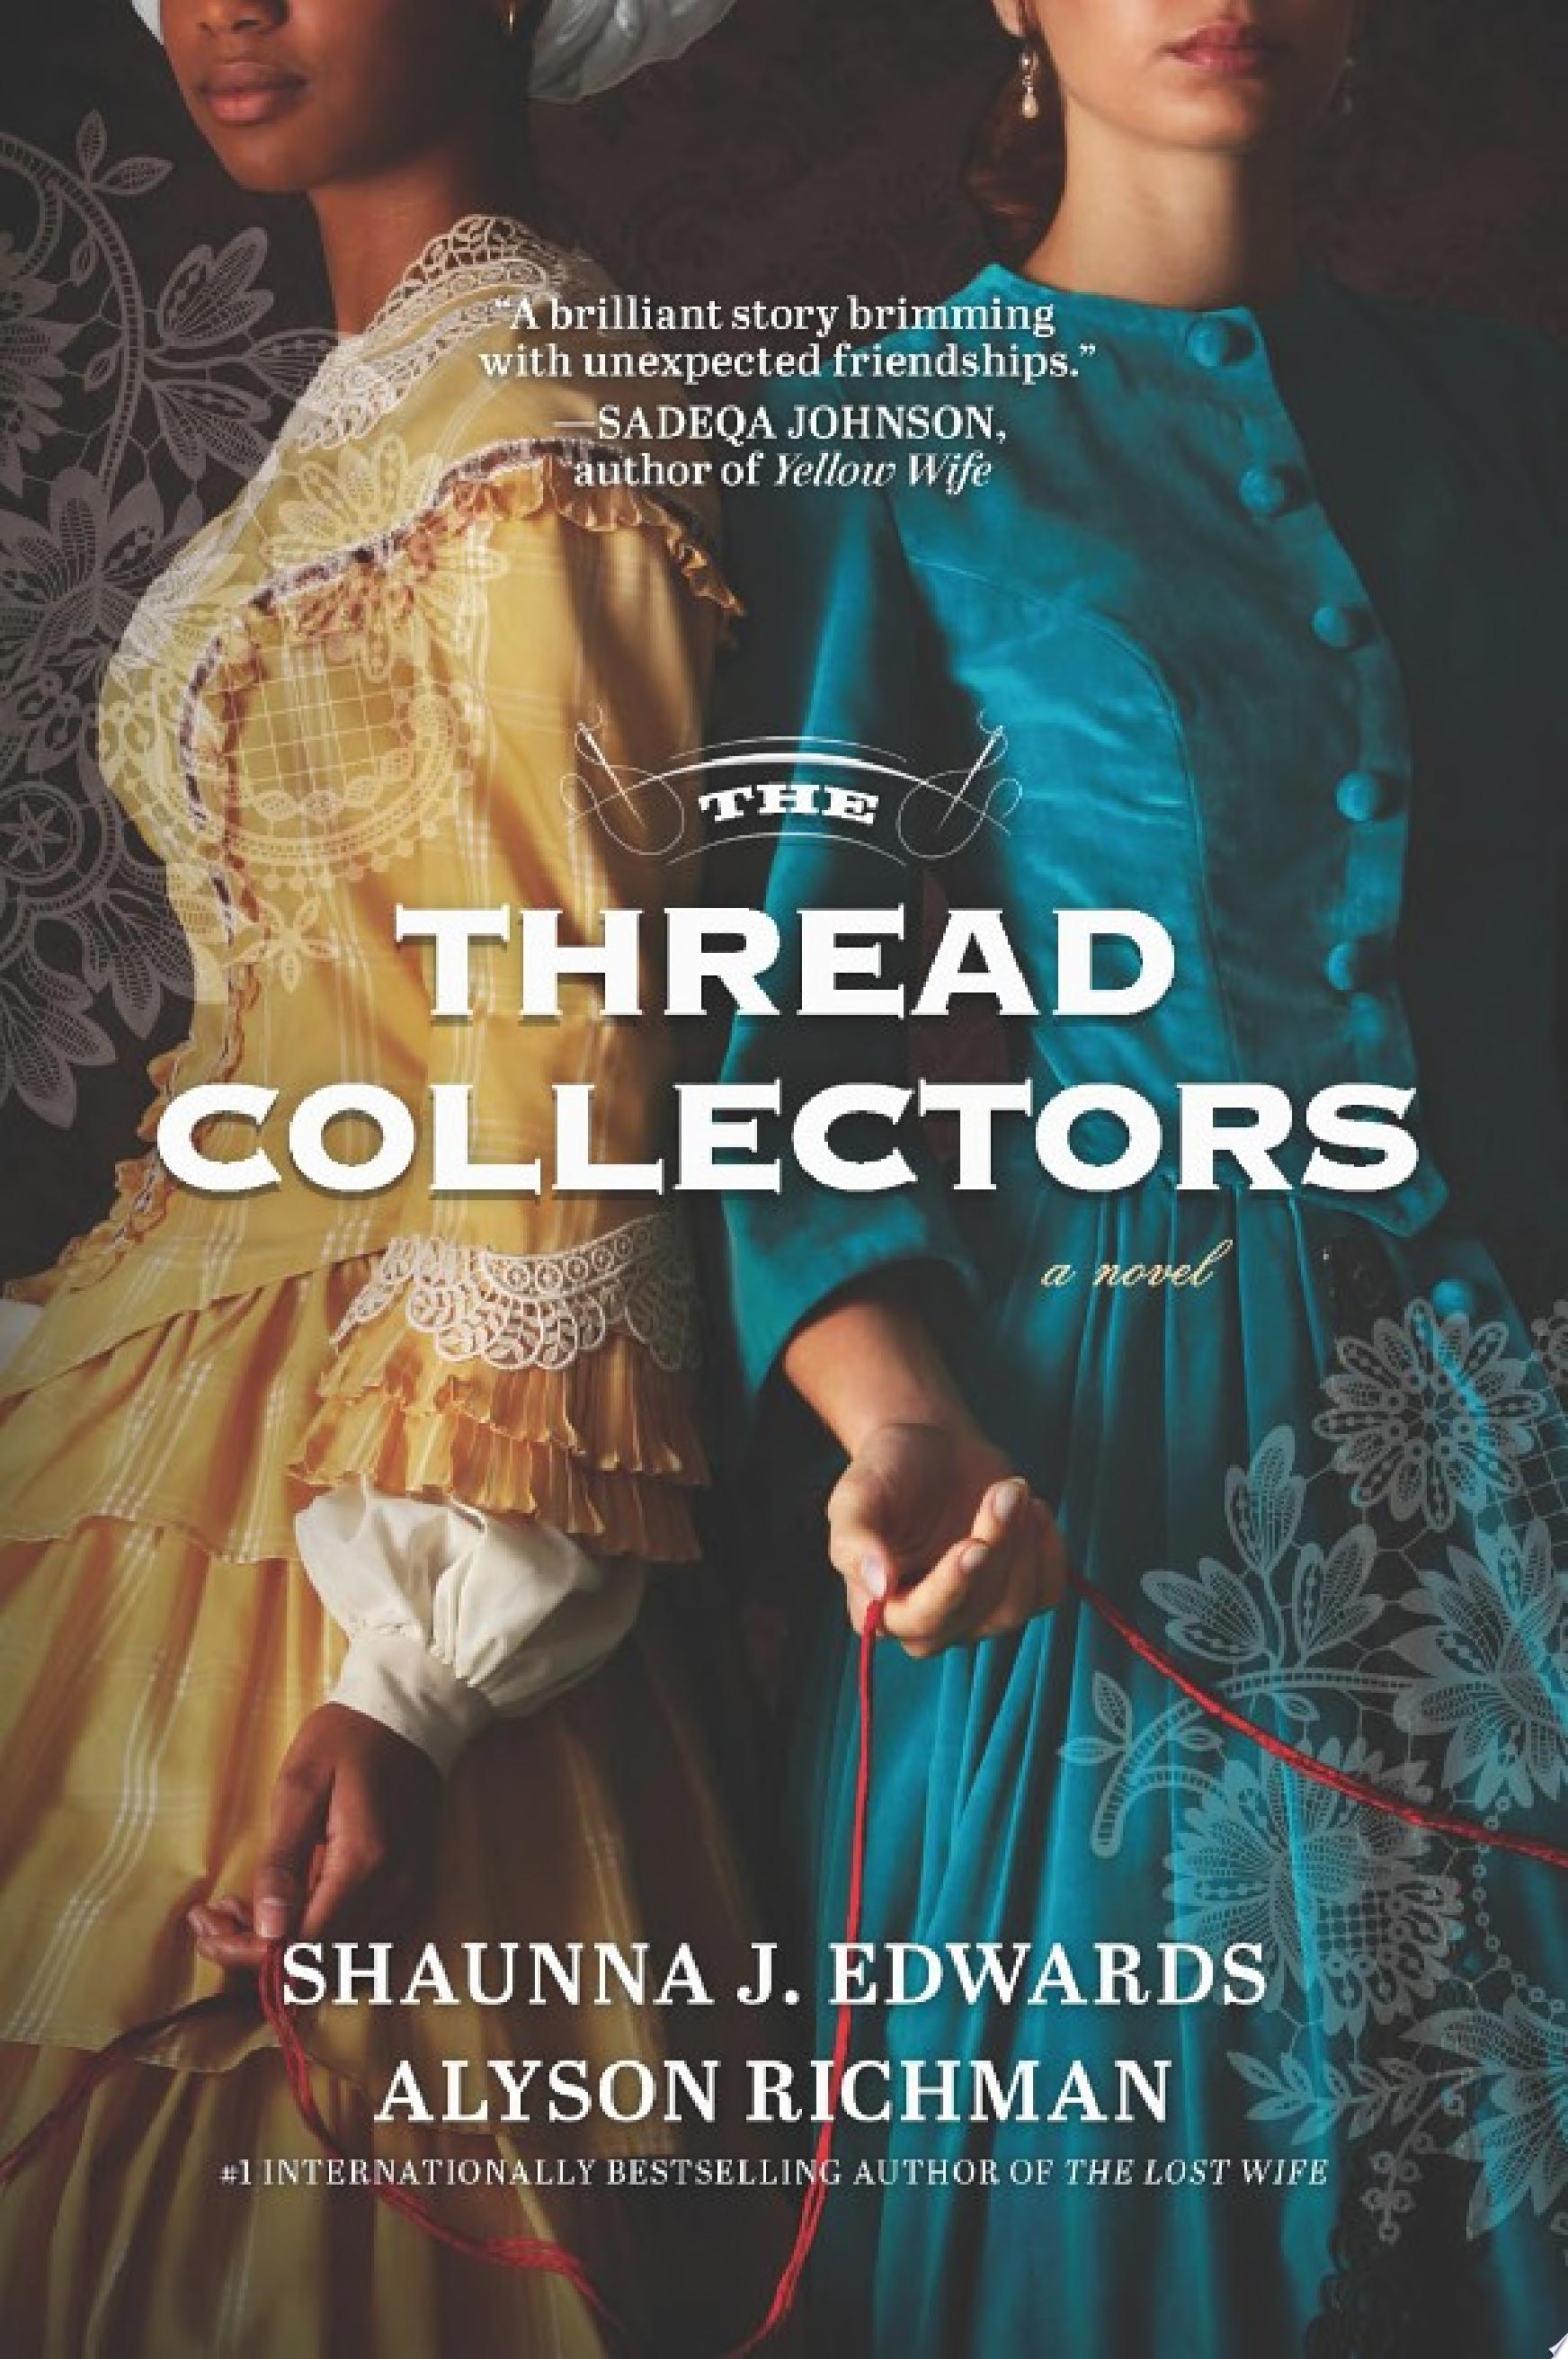 Image for "The Thread Collectors"